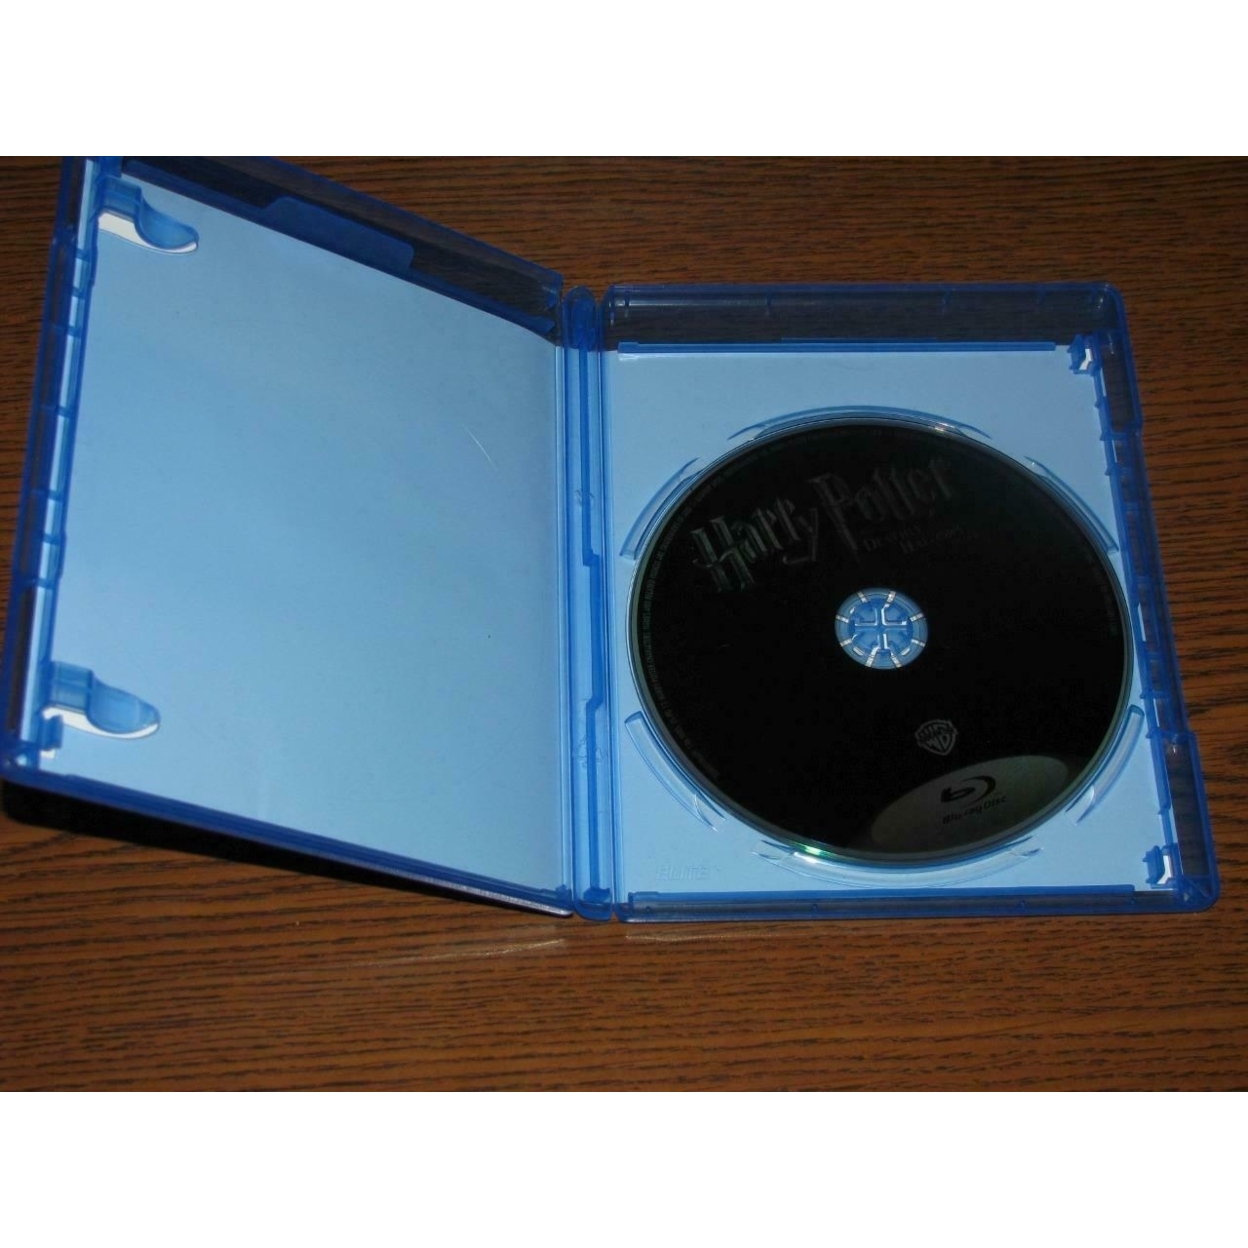 Harry Potter And The Deathly Hallows Part 1 Widescreen (Blu-ray) - image 2 of 3